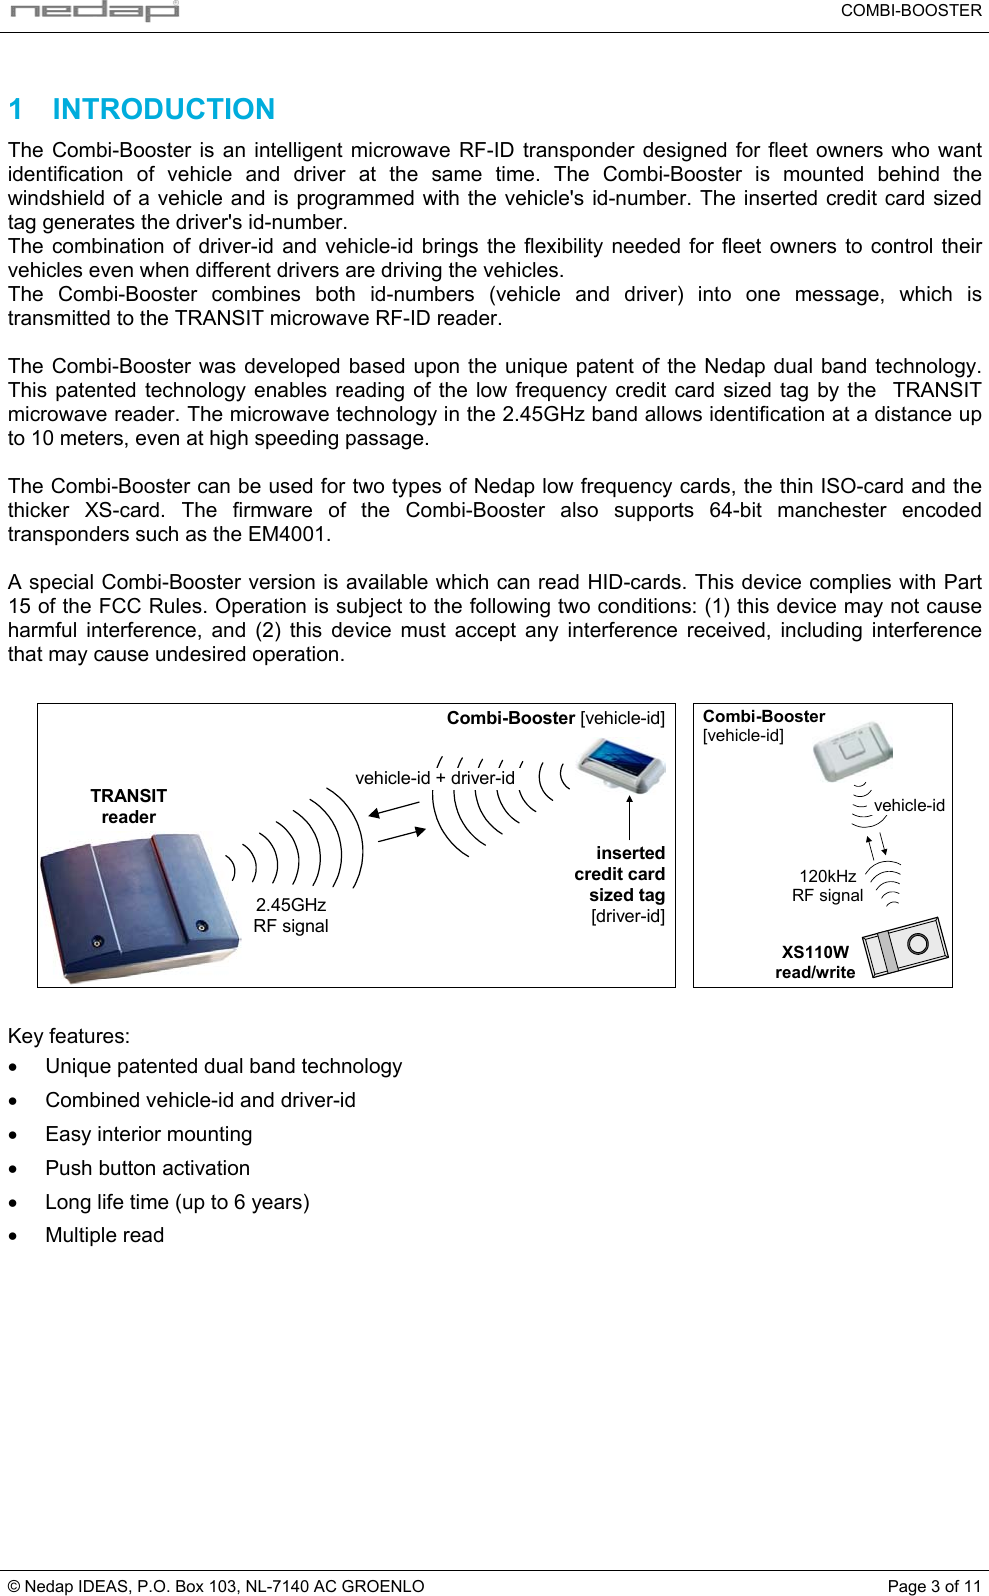   COMBI-BOOSTER © Nedap IDEAS, P.O. Box 103, NL-7140 AC GROENLO  Page 3 of 11 1 INTRODUCTION The Combi-Booster is an intelligent microwave RF-ID transponder designed for fleet owners who want identification of vehicle and driver at the same time. The Combi-Booster is mounted behind the windshield of a vehicle and is programmed with the vehicle&apos;s id-number. The inserted credit card sized tag generates the driver&apos;s id-number. The combination of driver-id and vehicle-id brings the flexibility needed for fleet owners to control their vehicles even when different drivers are driving the vehicles.  The Combi-Booster combines both id-numbers (vehicle and driver) into one message, which is transmitted to the TRANSIT microwave RF-ID reader.  The Combi-Booster was developed based upon the unique patent of the Nedap dual band technology. This patented technology enables reading of the low frequency credit card sized tag by the  TRANSIT microwave reader. The microwave technology in the 2.45GHz band allows identification at a distance up to 10 meters, even at high speeding passage.  The Combi-Booster can be used for two types of Nedap low frequency cards, the thin ISO-card and the thicker XS-card. The firmware of the Combi-Booster also supports 64-bit manchester encoded transponders such as the EM4001.  A special Combi-Booster version is available which can read HID-cards. This device complies with Part 15 of the FCC Rules. Operation is subject to the following two conditions: (1) this device may not cause harmful interference, and (2) this device must accept any interference received, including interference that may cause undesired operation.  2.45GHzRF signalvehicle-id + driver-idTRANSITreaderCombi-Booster [vehicle-id]insertedcredit cardsized tag[driver-id]   Combi-Booster[vehicle-id]120kHzRF signalvehicle-idXS110Wread/write   Key features: •  Unique patented dual band technology •  Combined vehicle-id and driver-id •  Easy interior mounting •  Push button activation •  Long life time (up to 6 years) •  Multiple read  